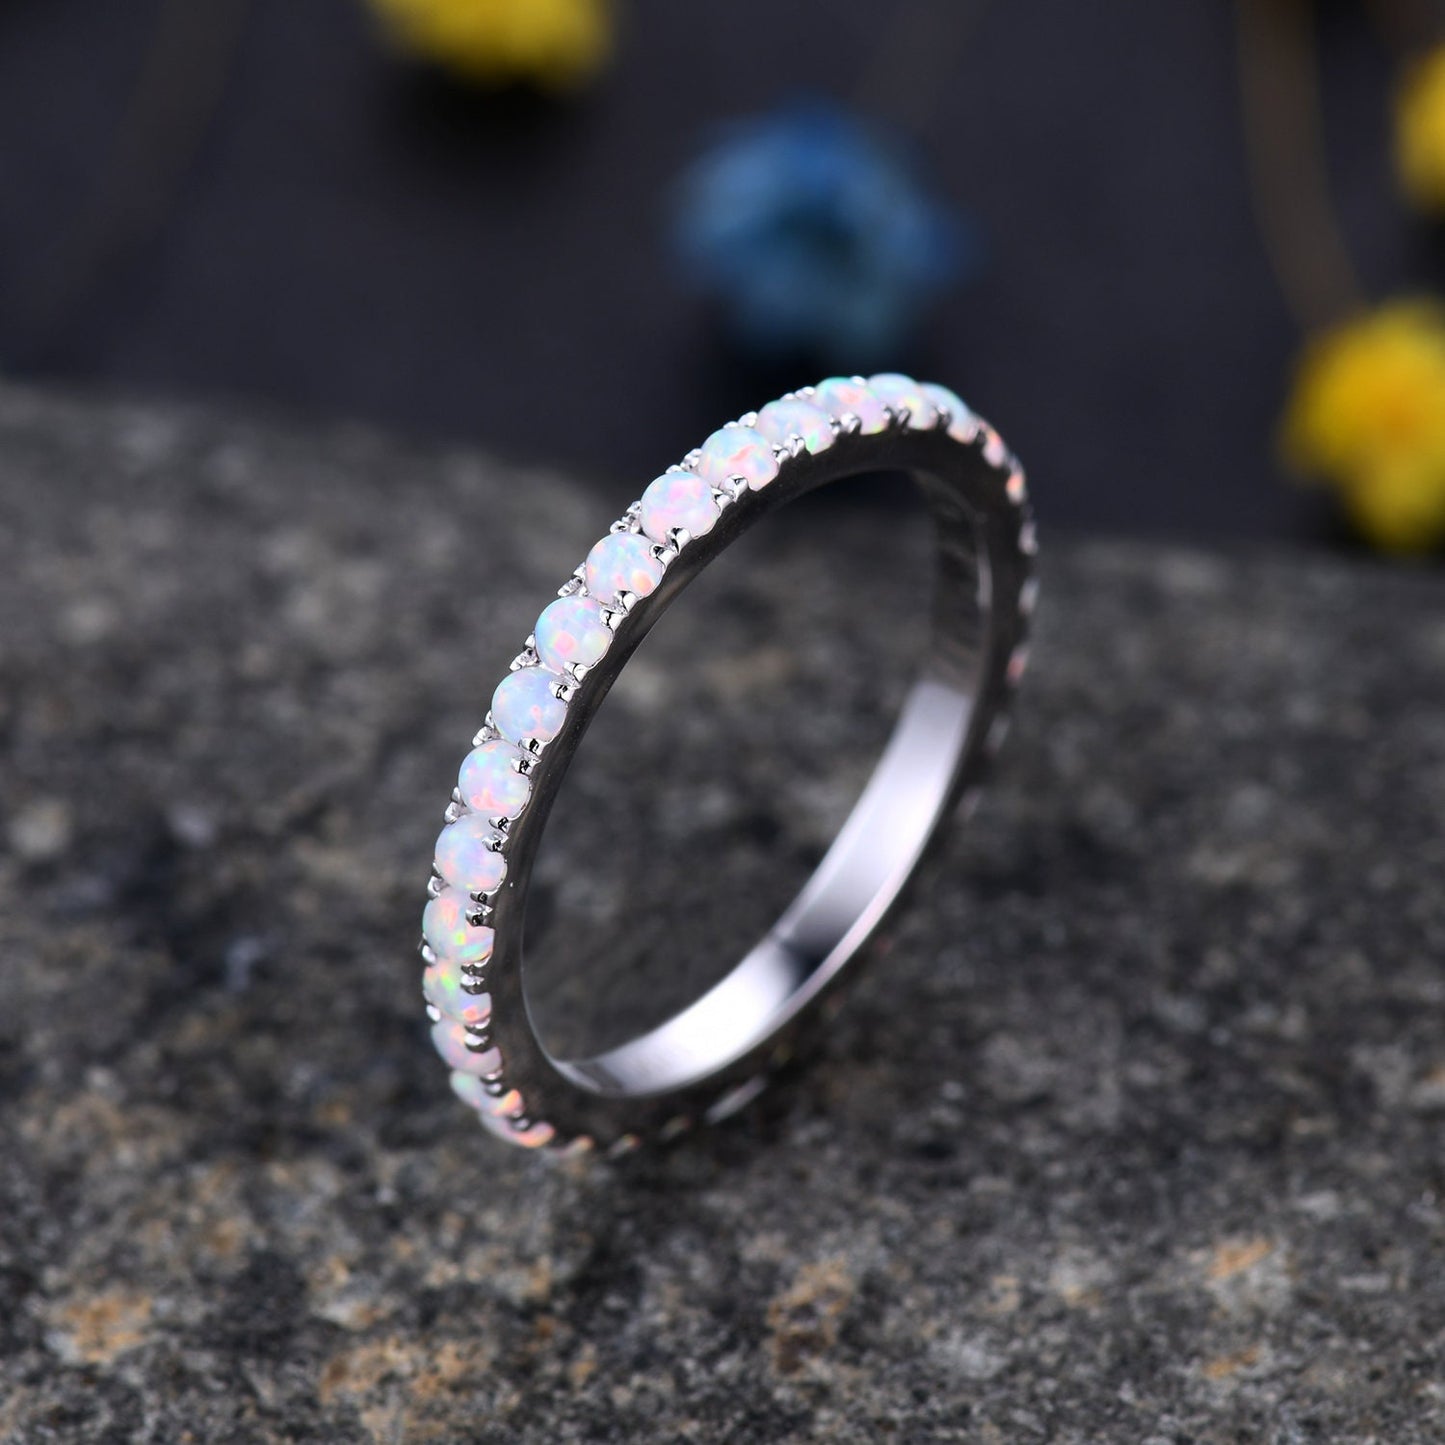 1.5mm Opal Ring,Opal Wedding Band,14K White Gold,Full Eternity Band,Stacking Ring,Matching Band,Promise Ring,Anniversary,Gift for Women